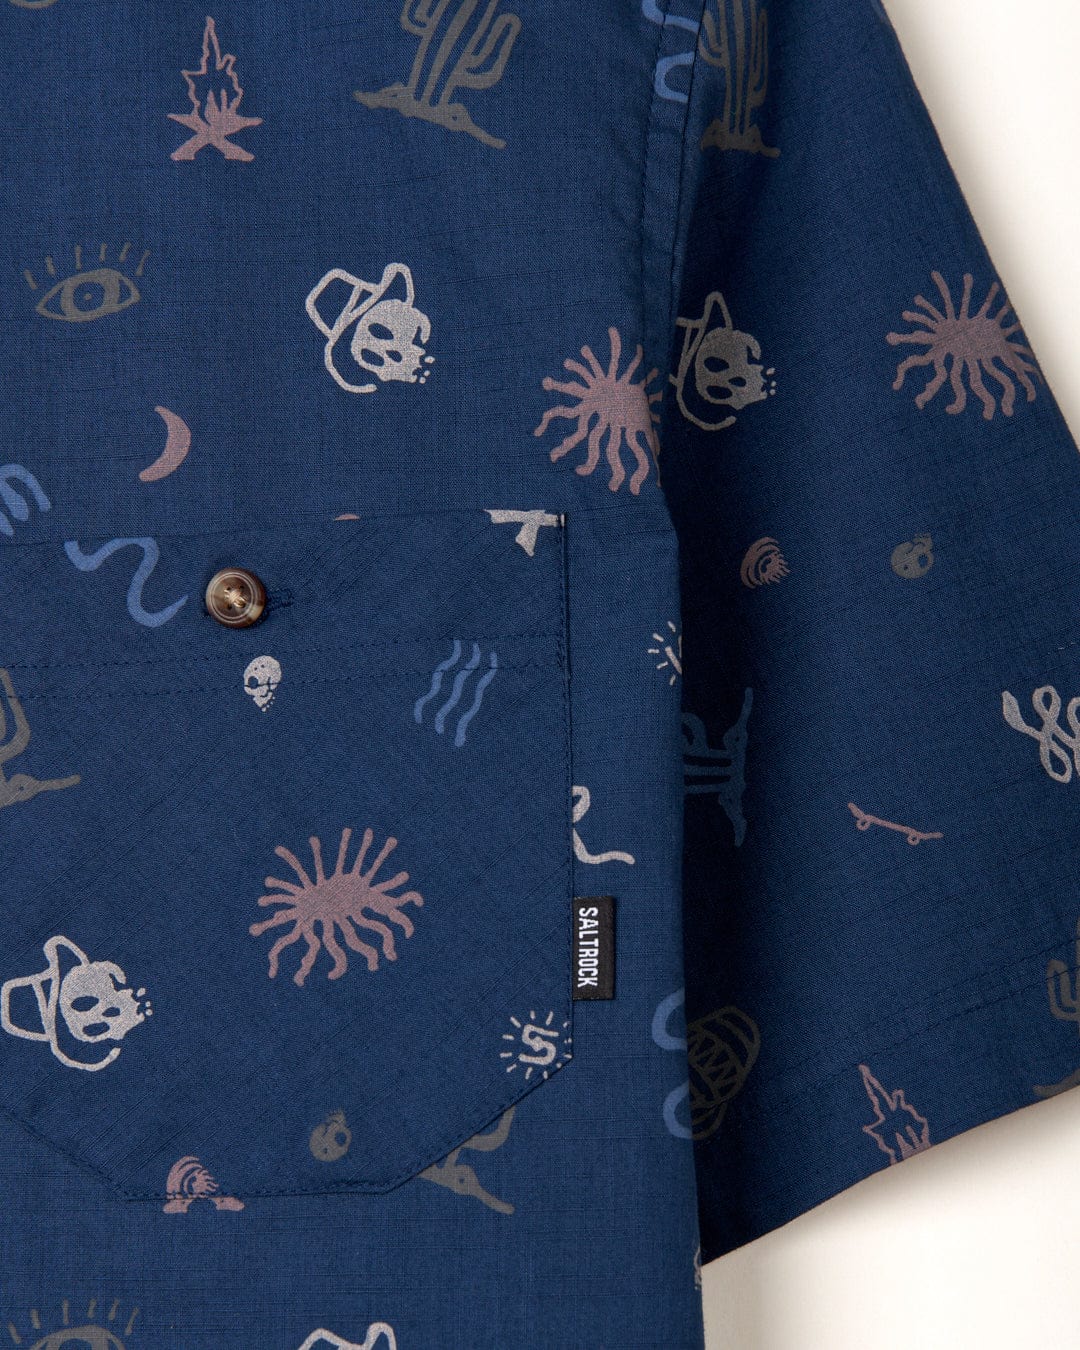 A Saltrock blue cotton Last Stop - Mens Short Sleeve Shirt with a collar, featuring cacti and other animals on it.